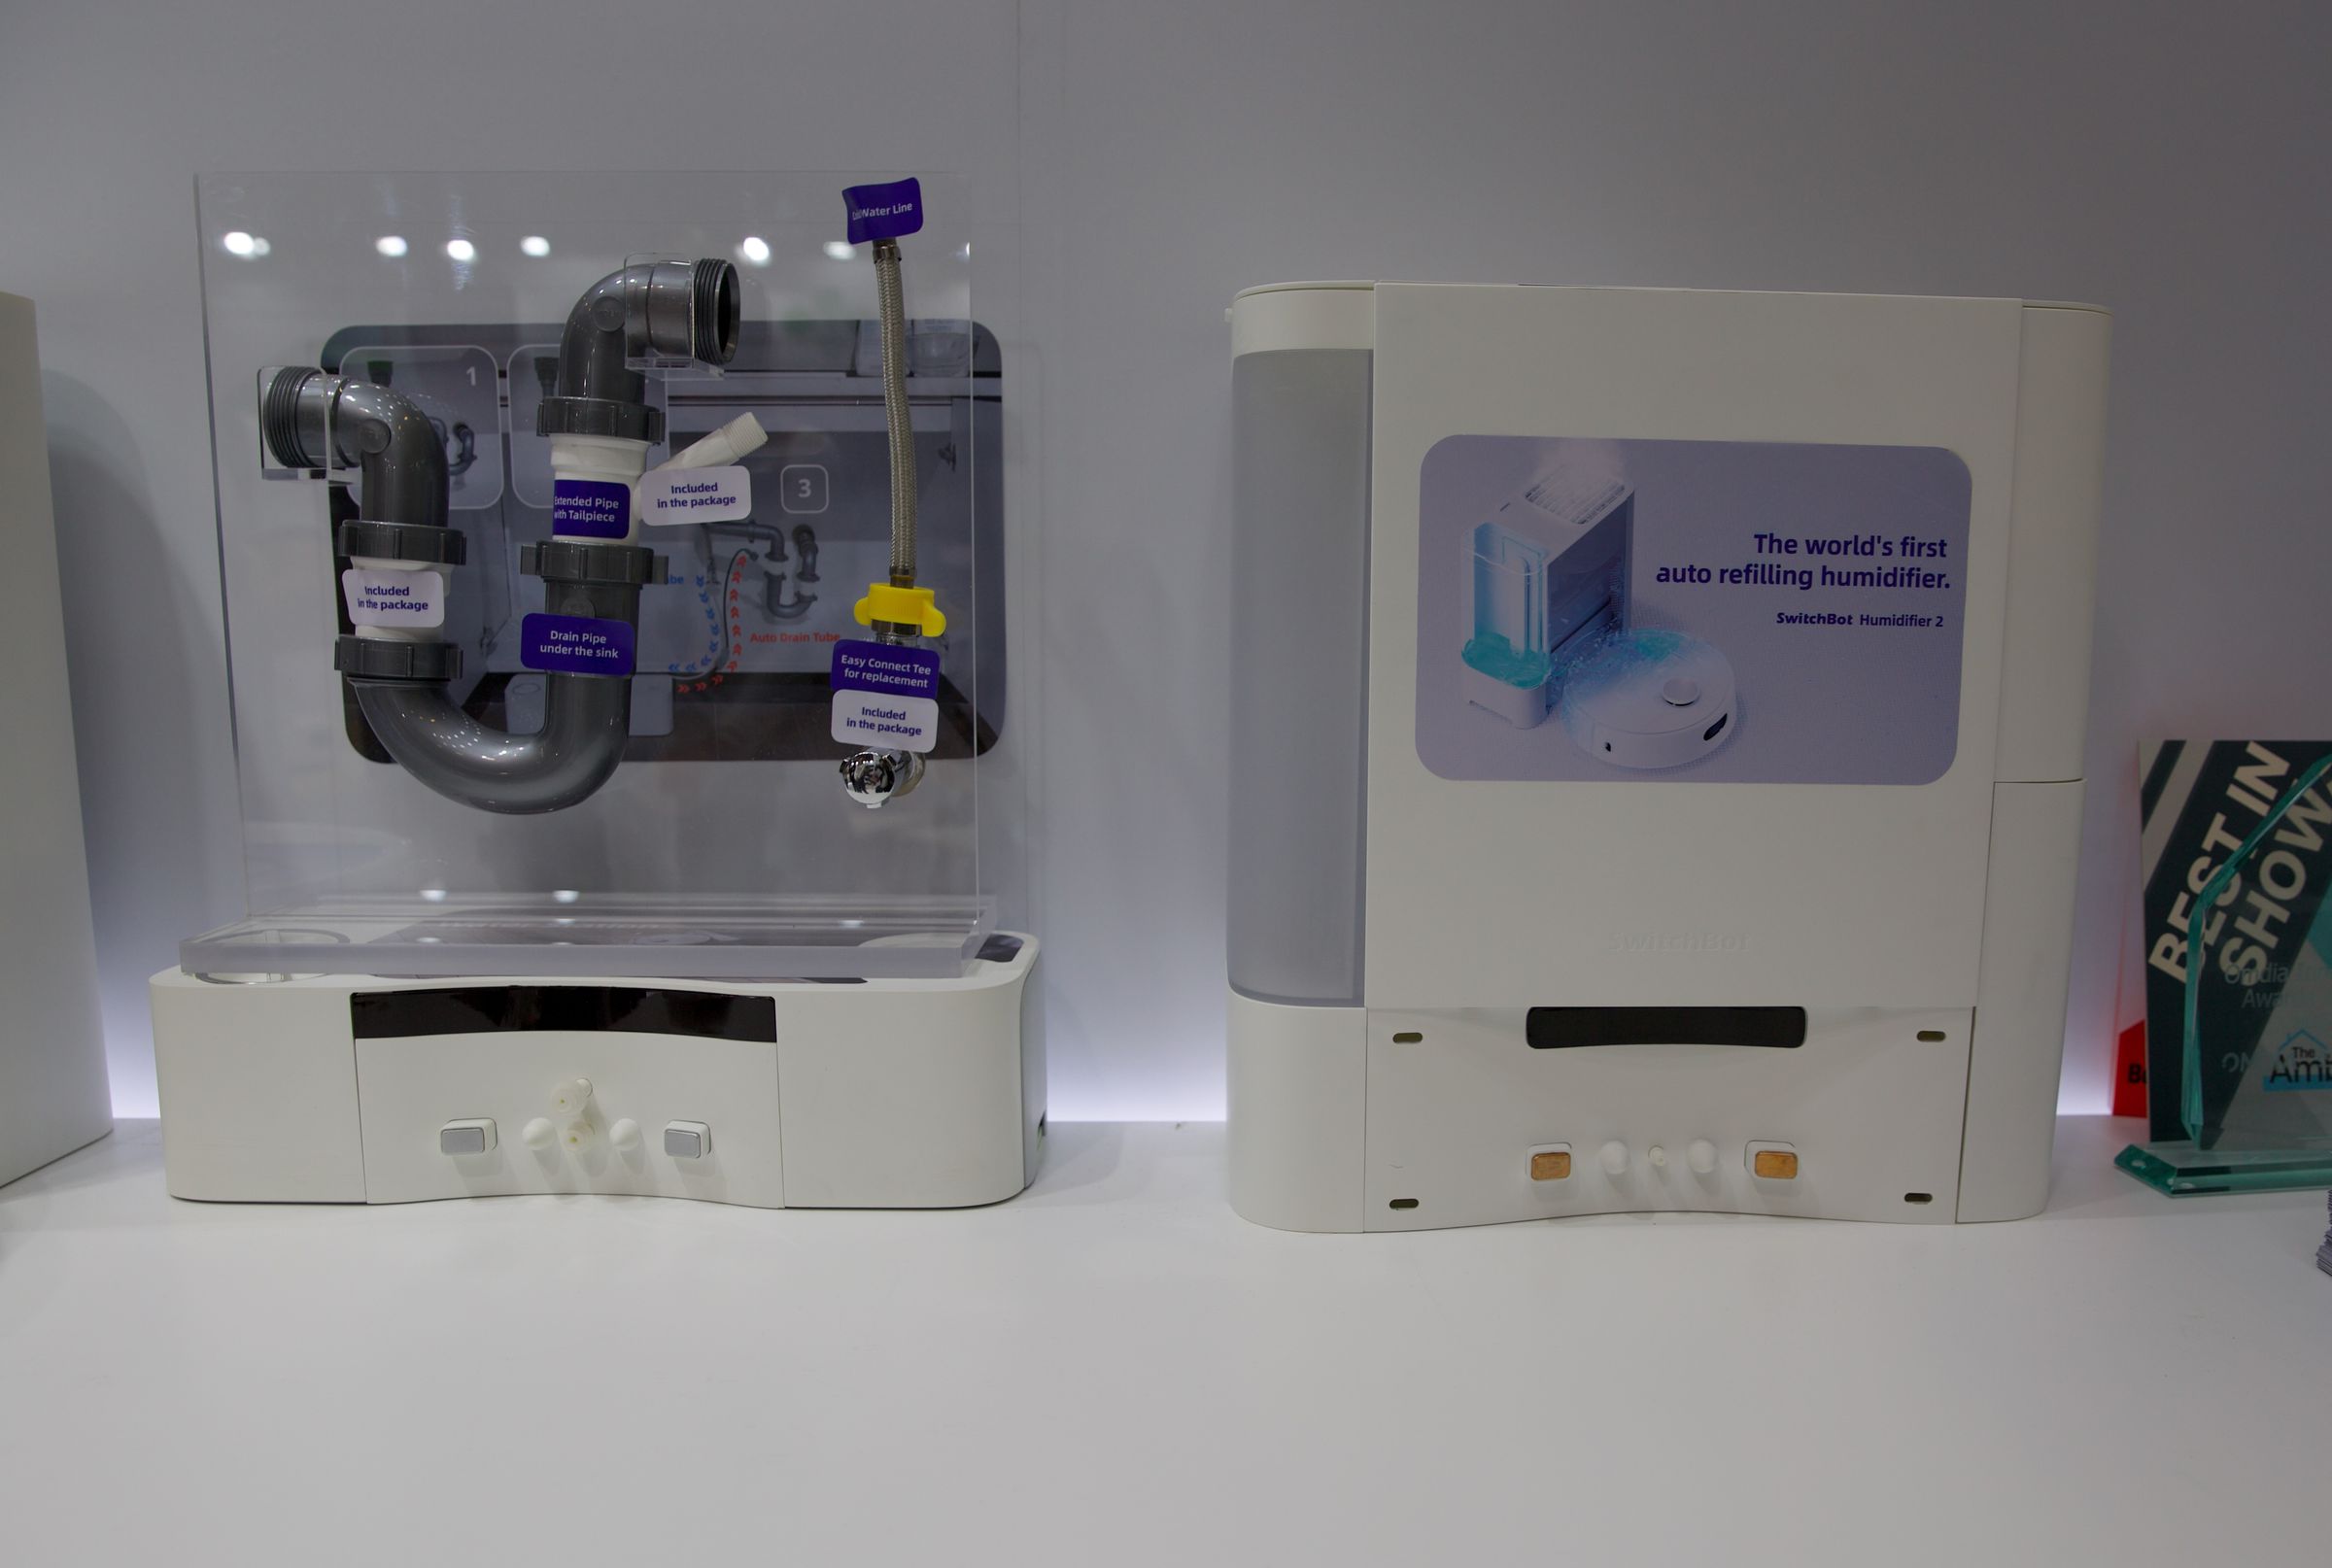 The forthcoming SwitchBot Humidifier (right) next to the water station. The S10 will be able to refill the humidifier with water from the station. 